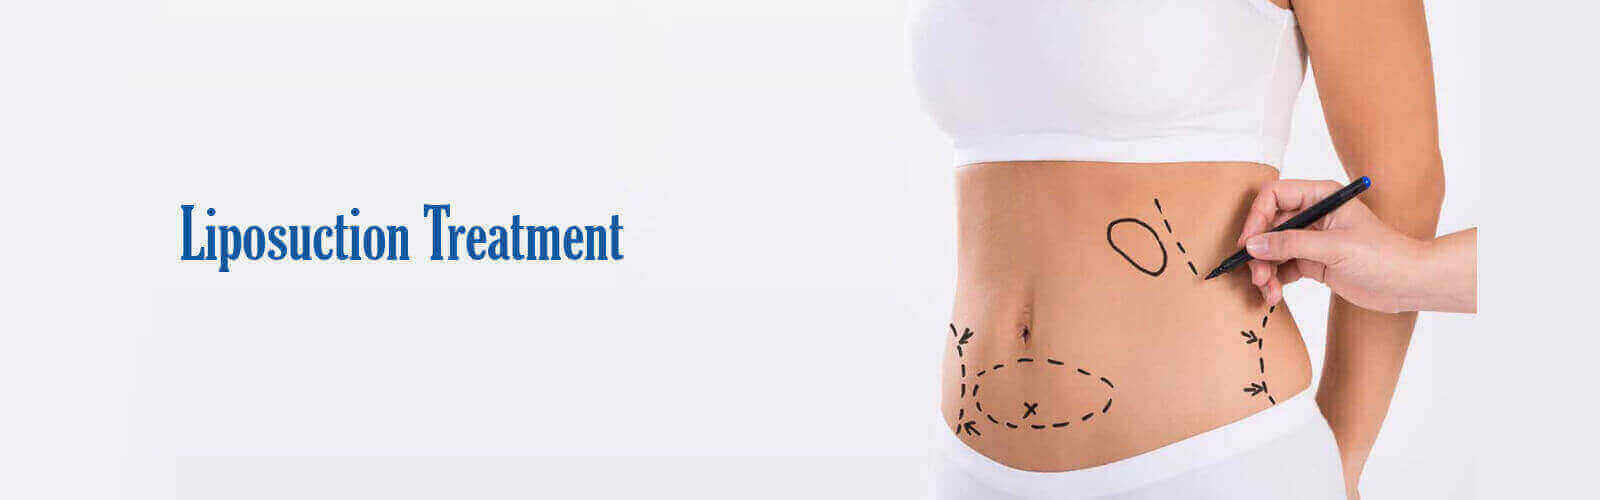 Liposuction Treatment in Afghanistan